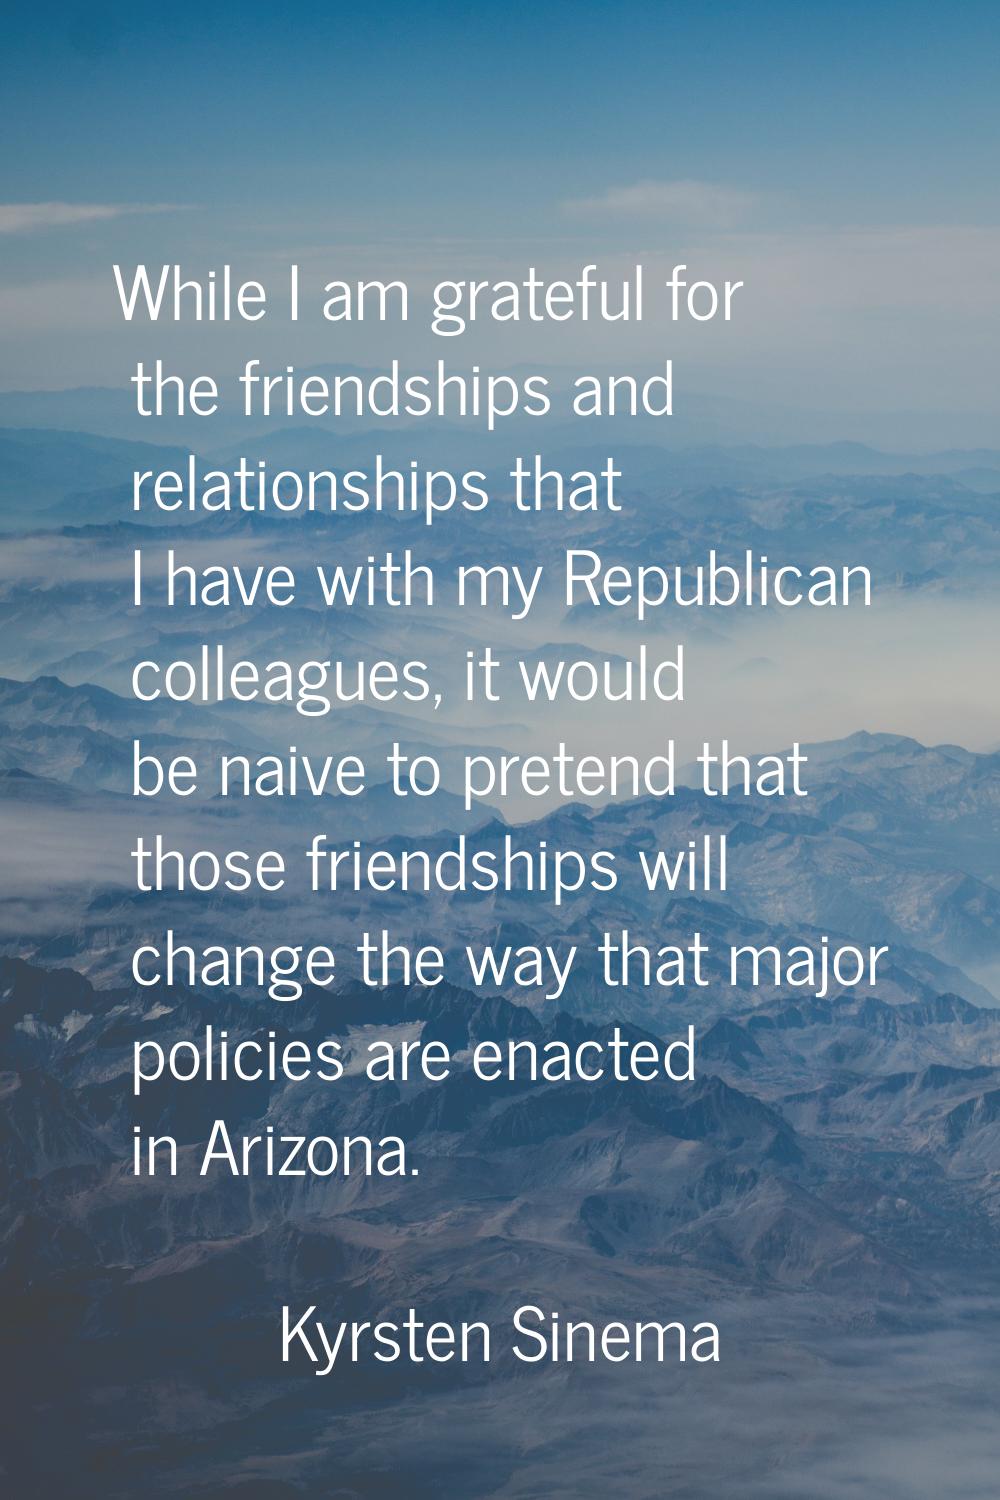 While I am grateful for the friendships and relationships that I have with my Republican colleagues